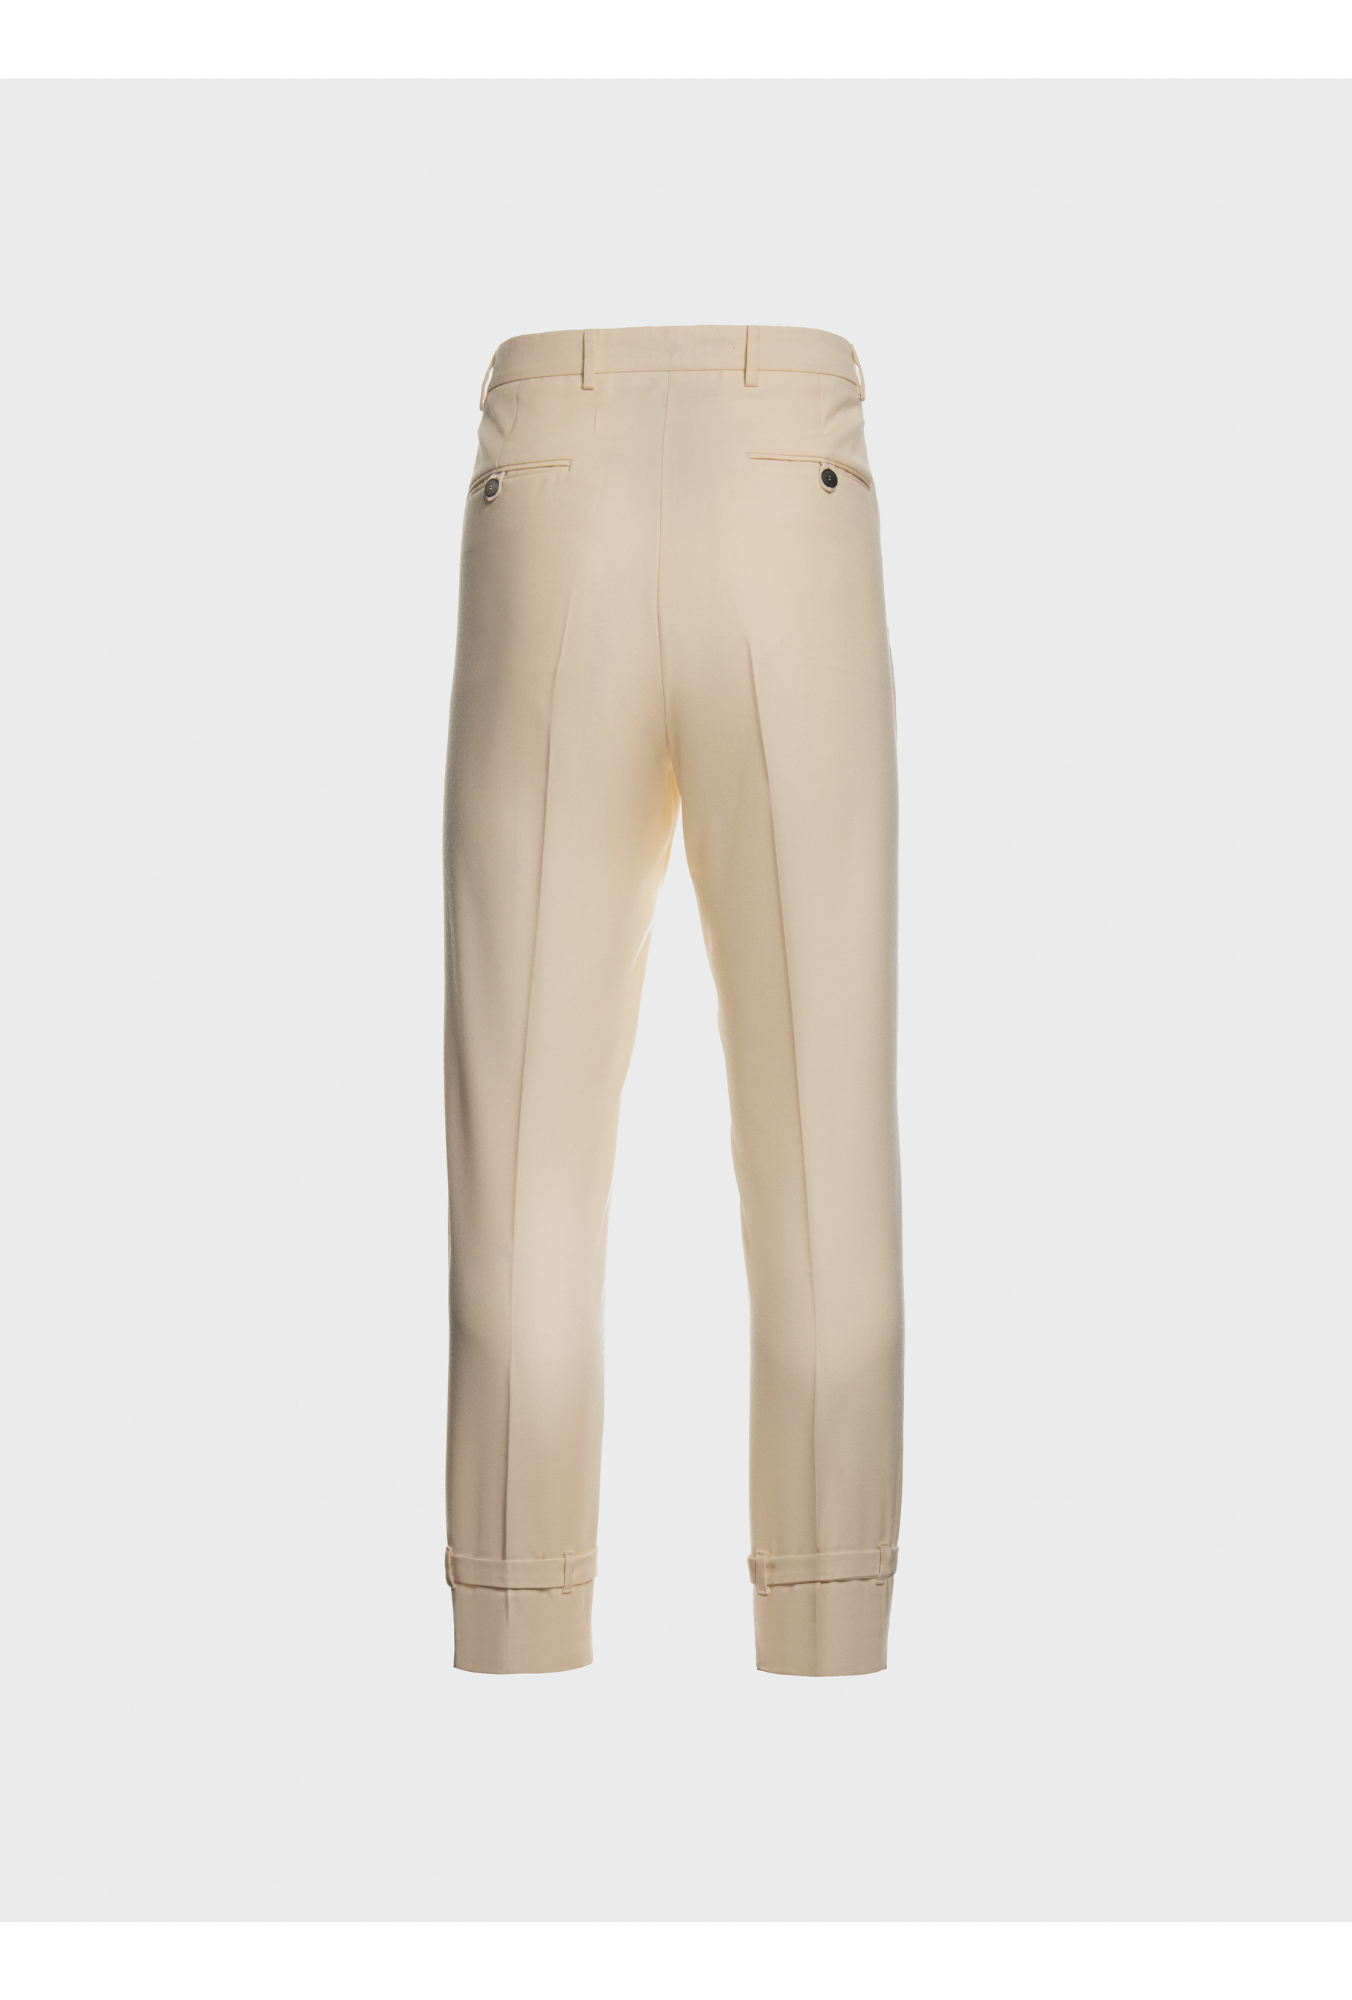 Classic pant with high waste and strips